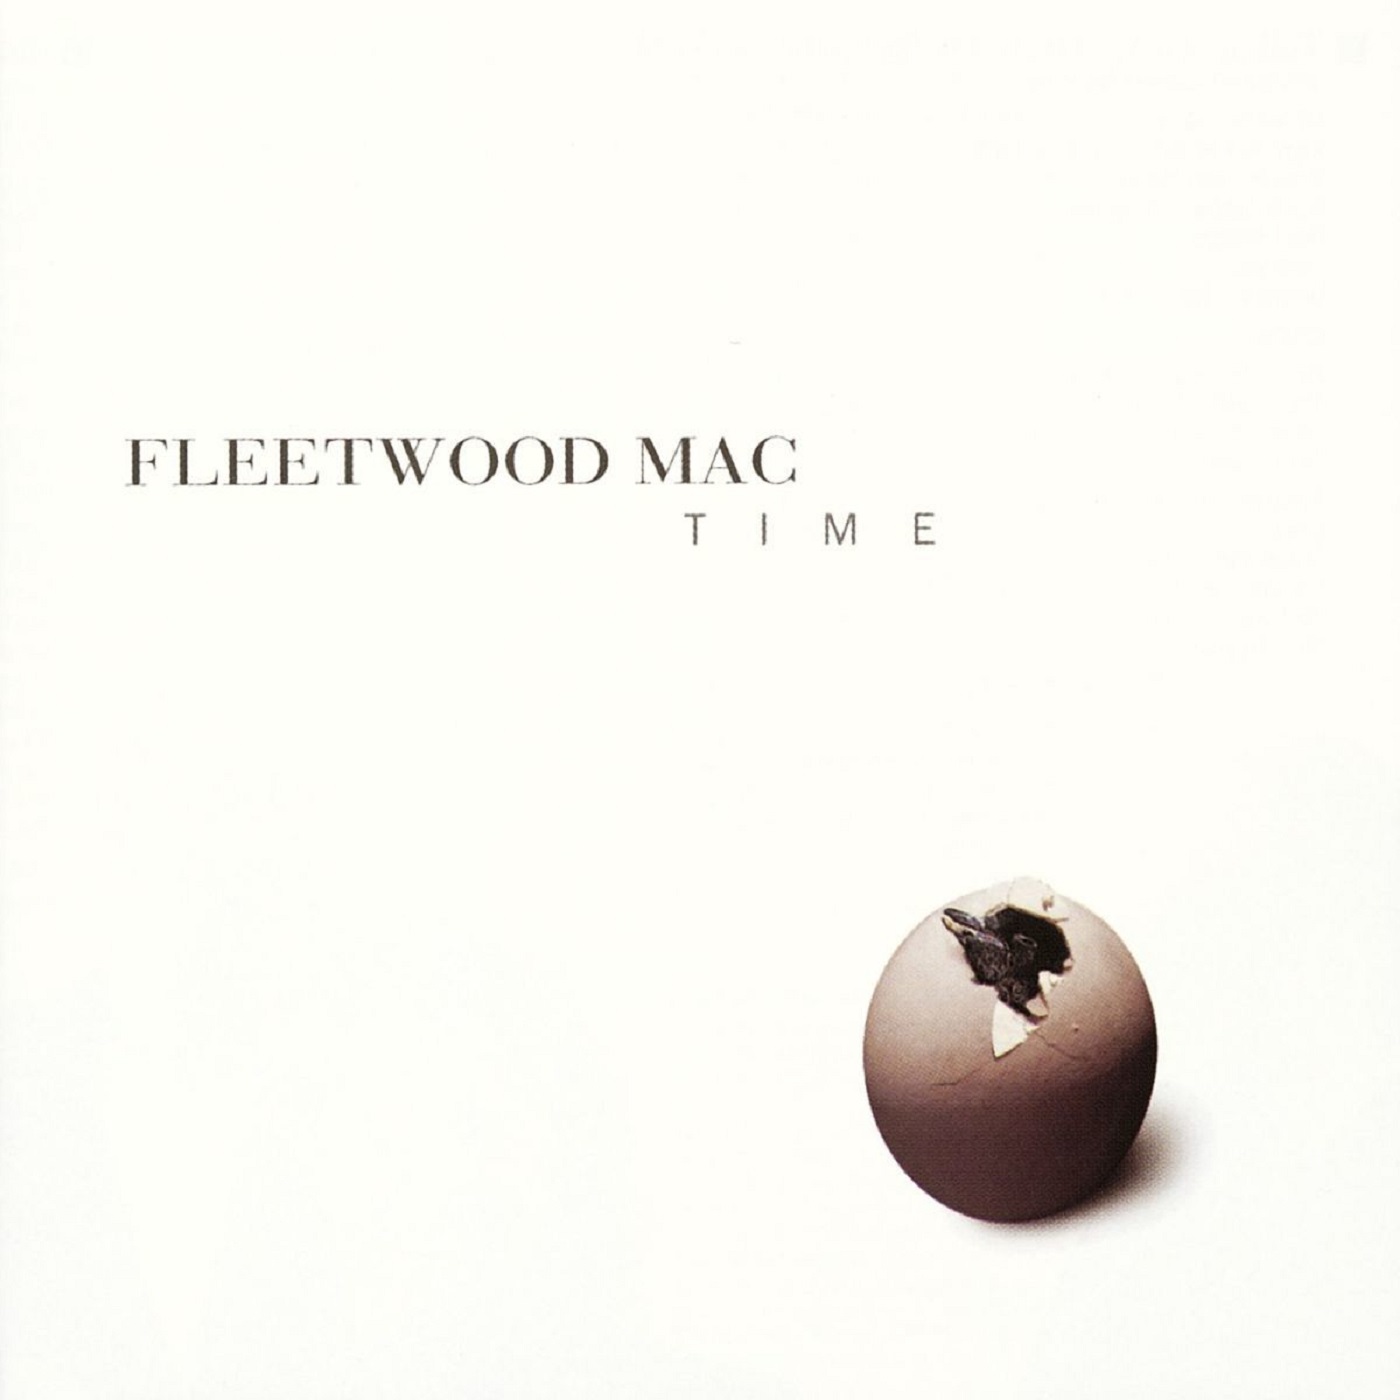 Fleetwood Mac’s “Time” (with Heather Haas and Kelly Prestridge)